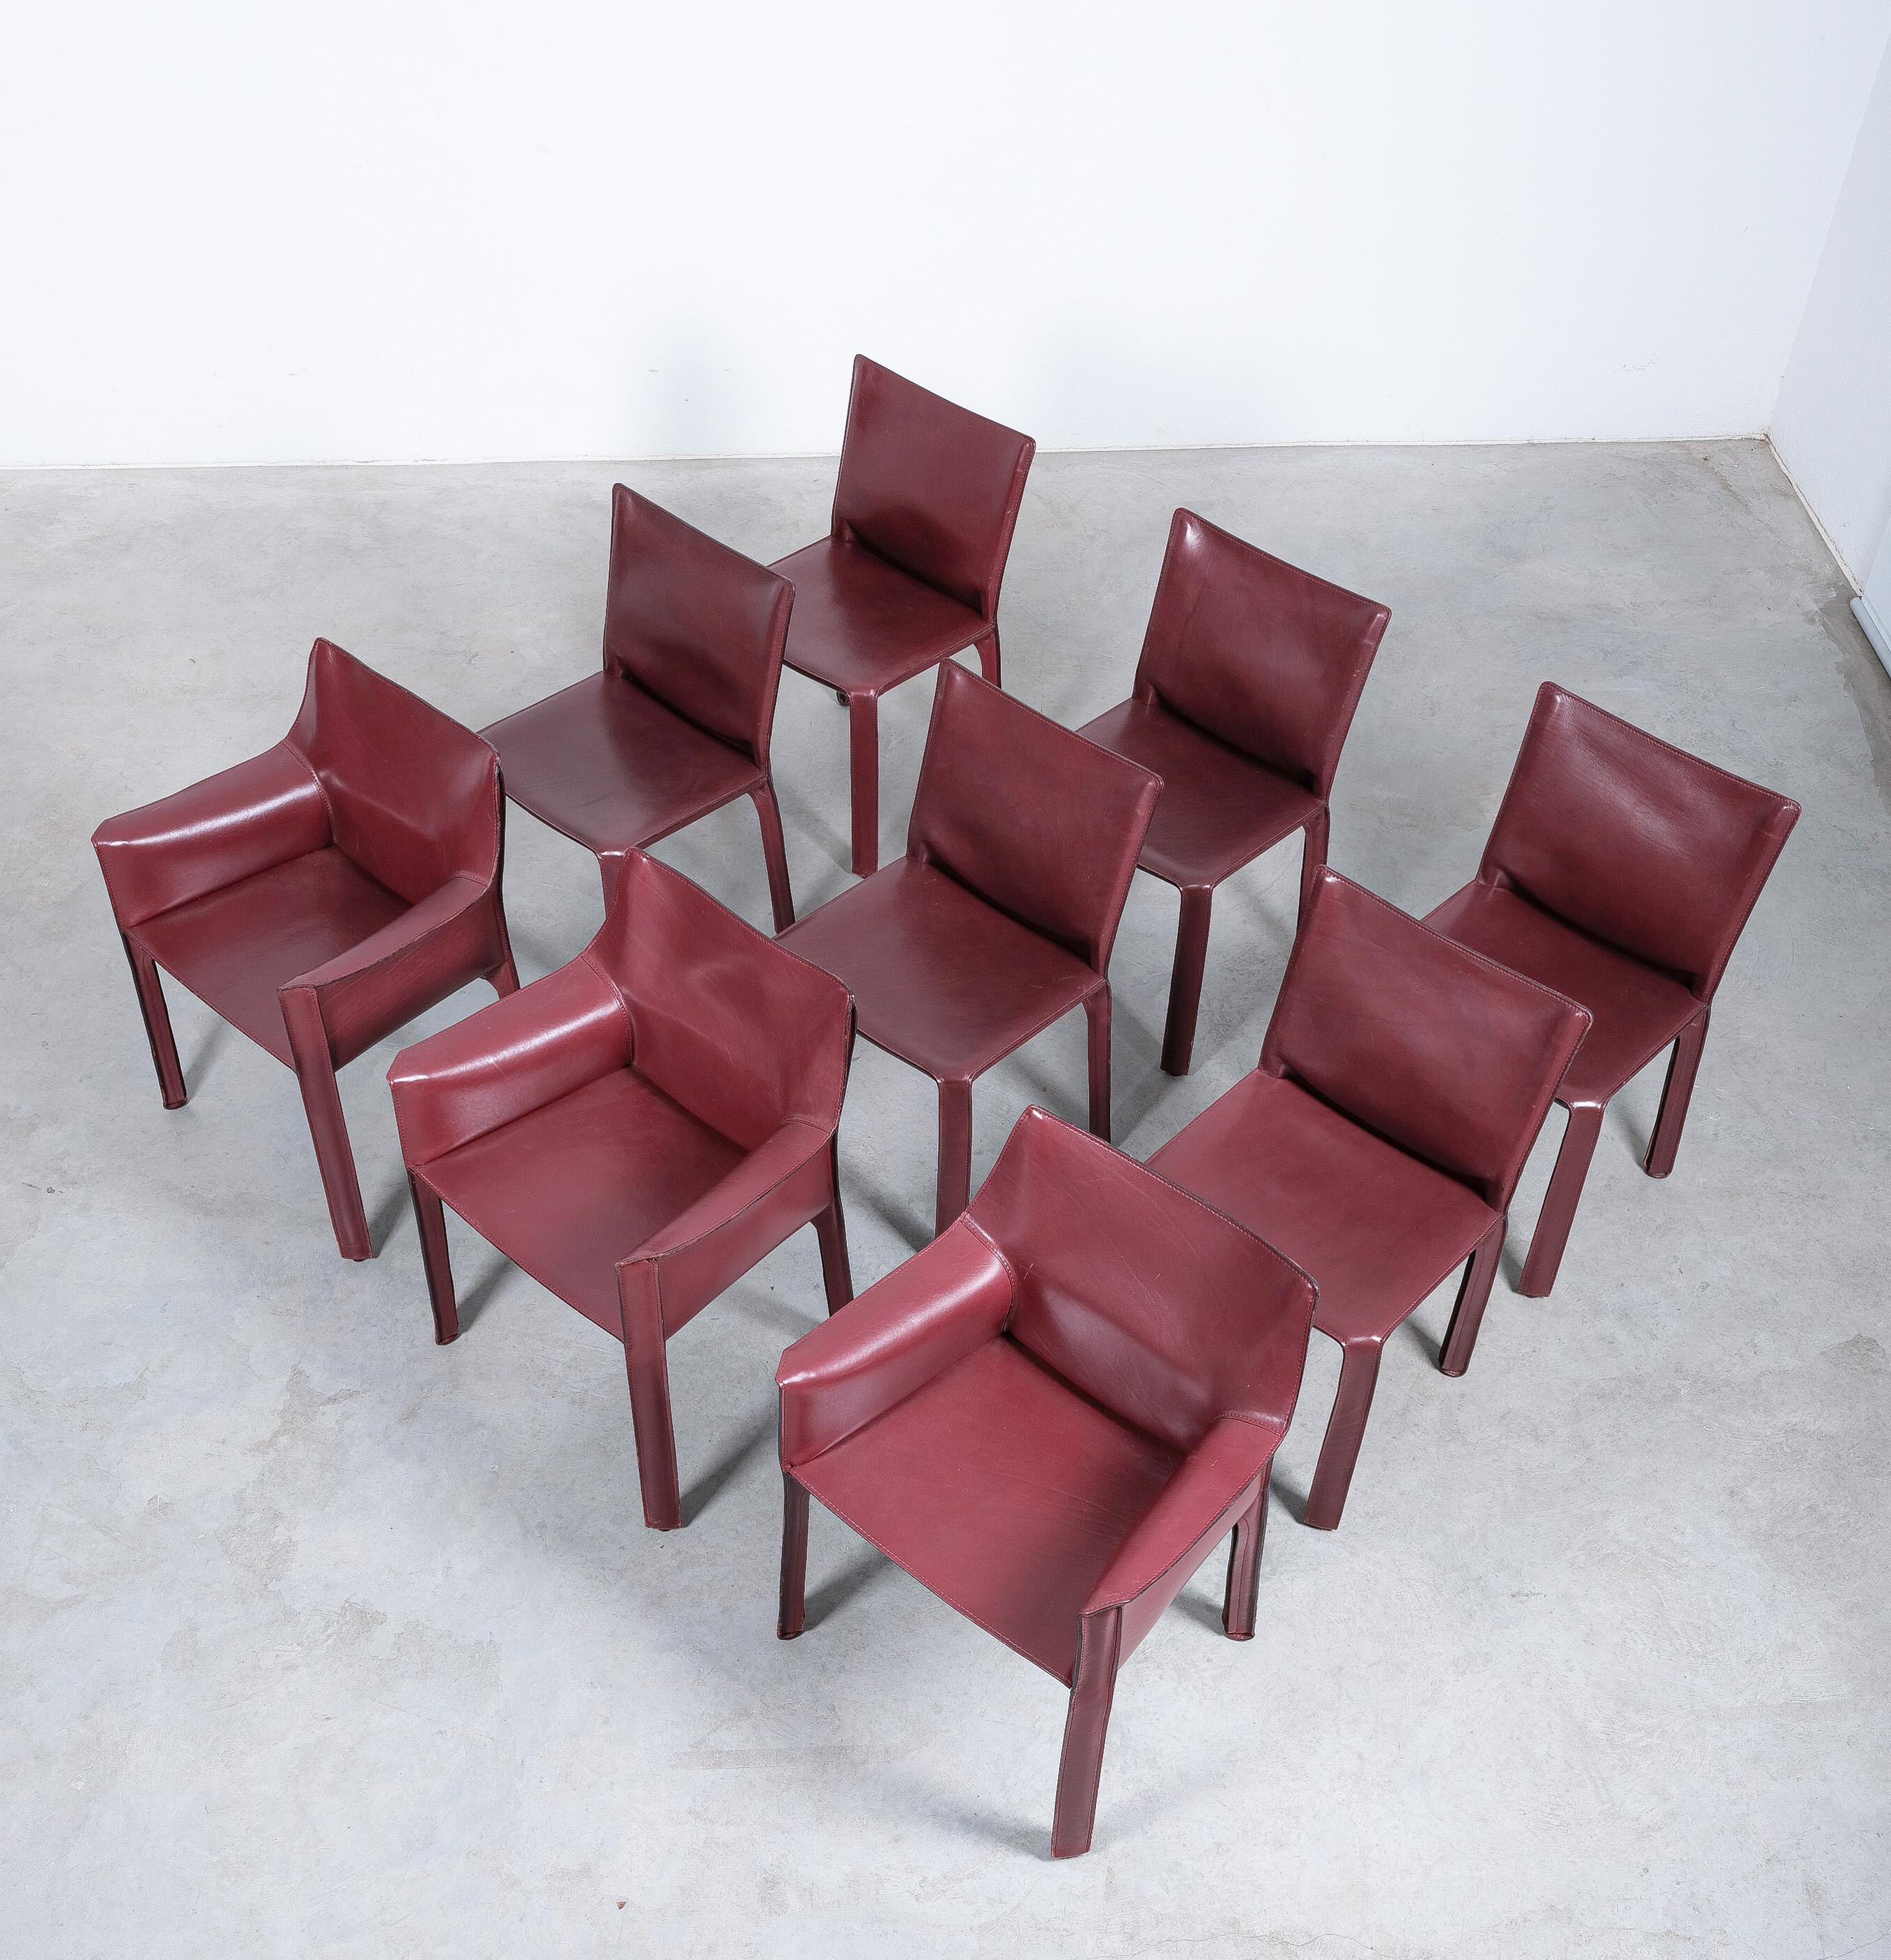 Mario Bellini Cassina Cab 412, 413 Set of Ten 9 Red Leather Dining Chairs 1